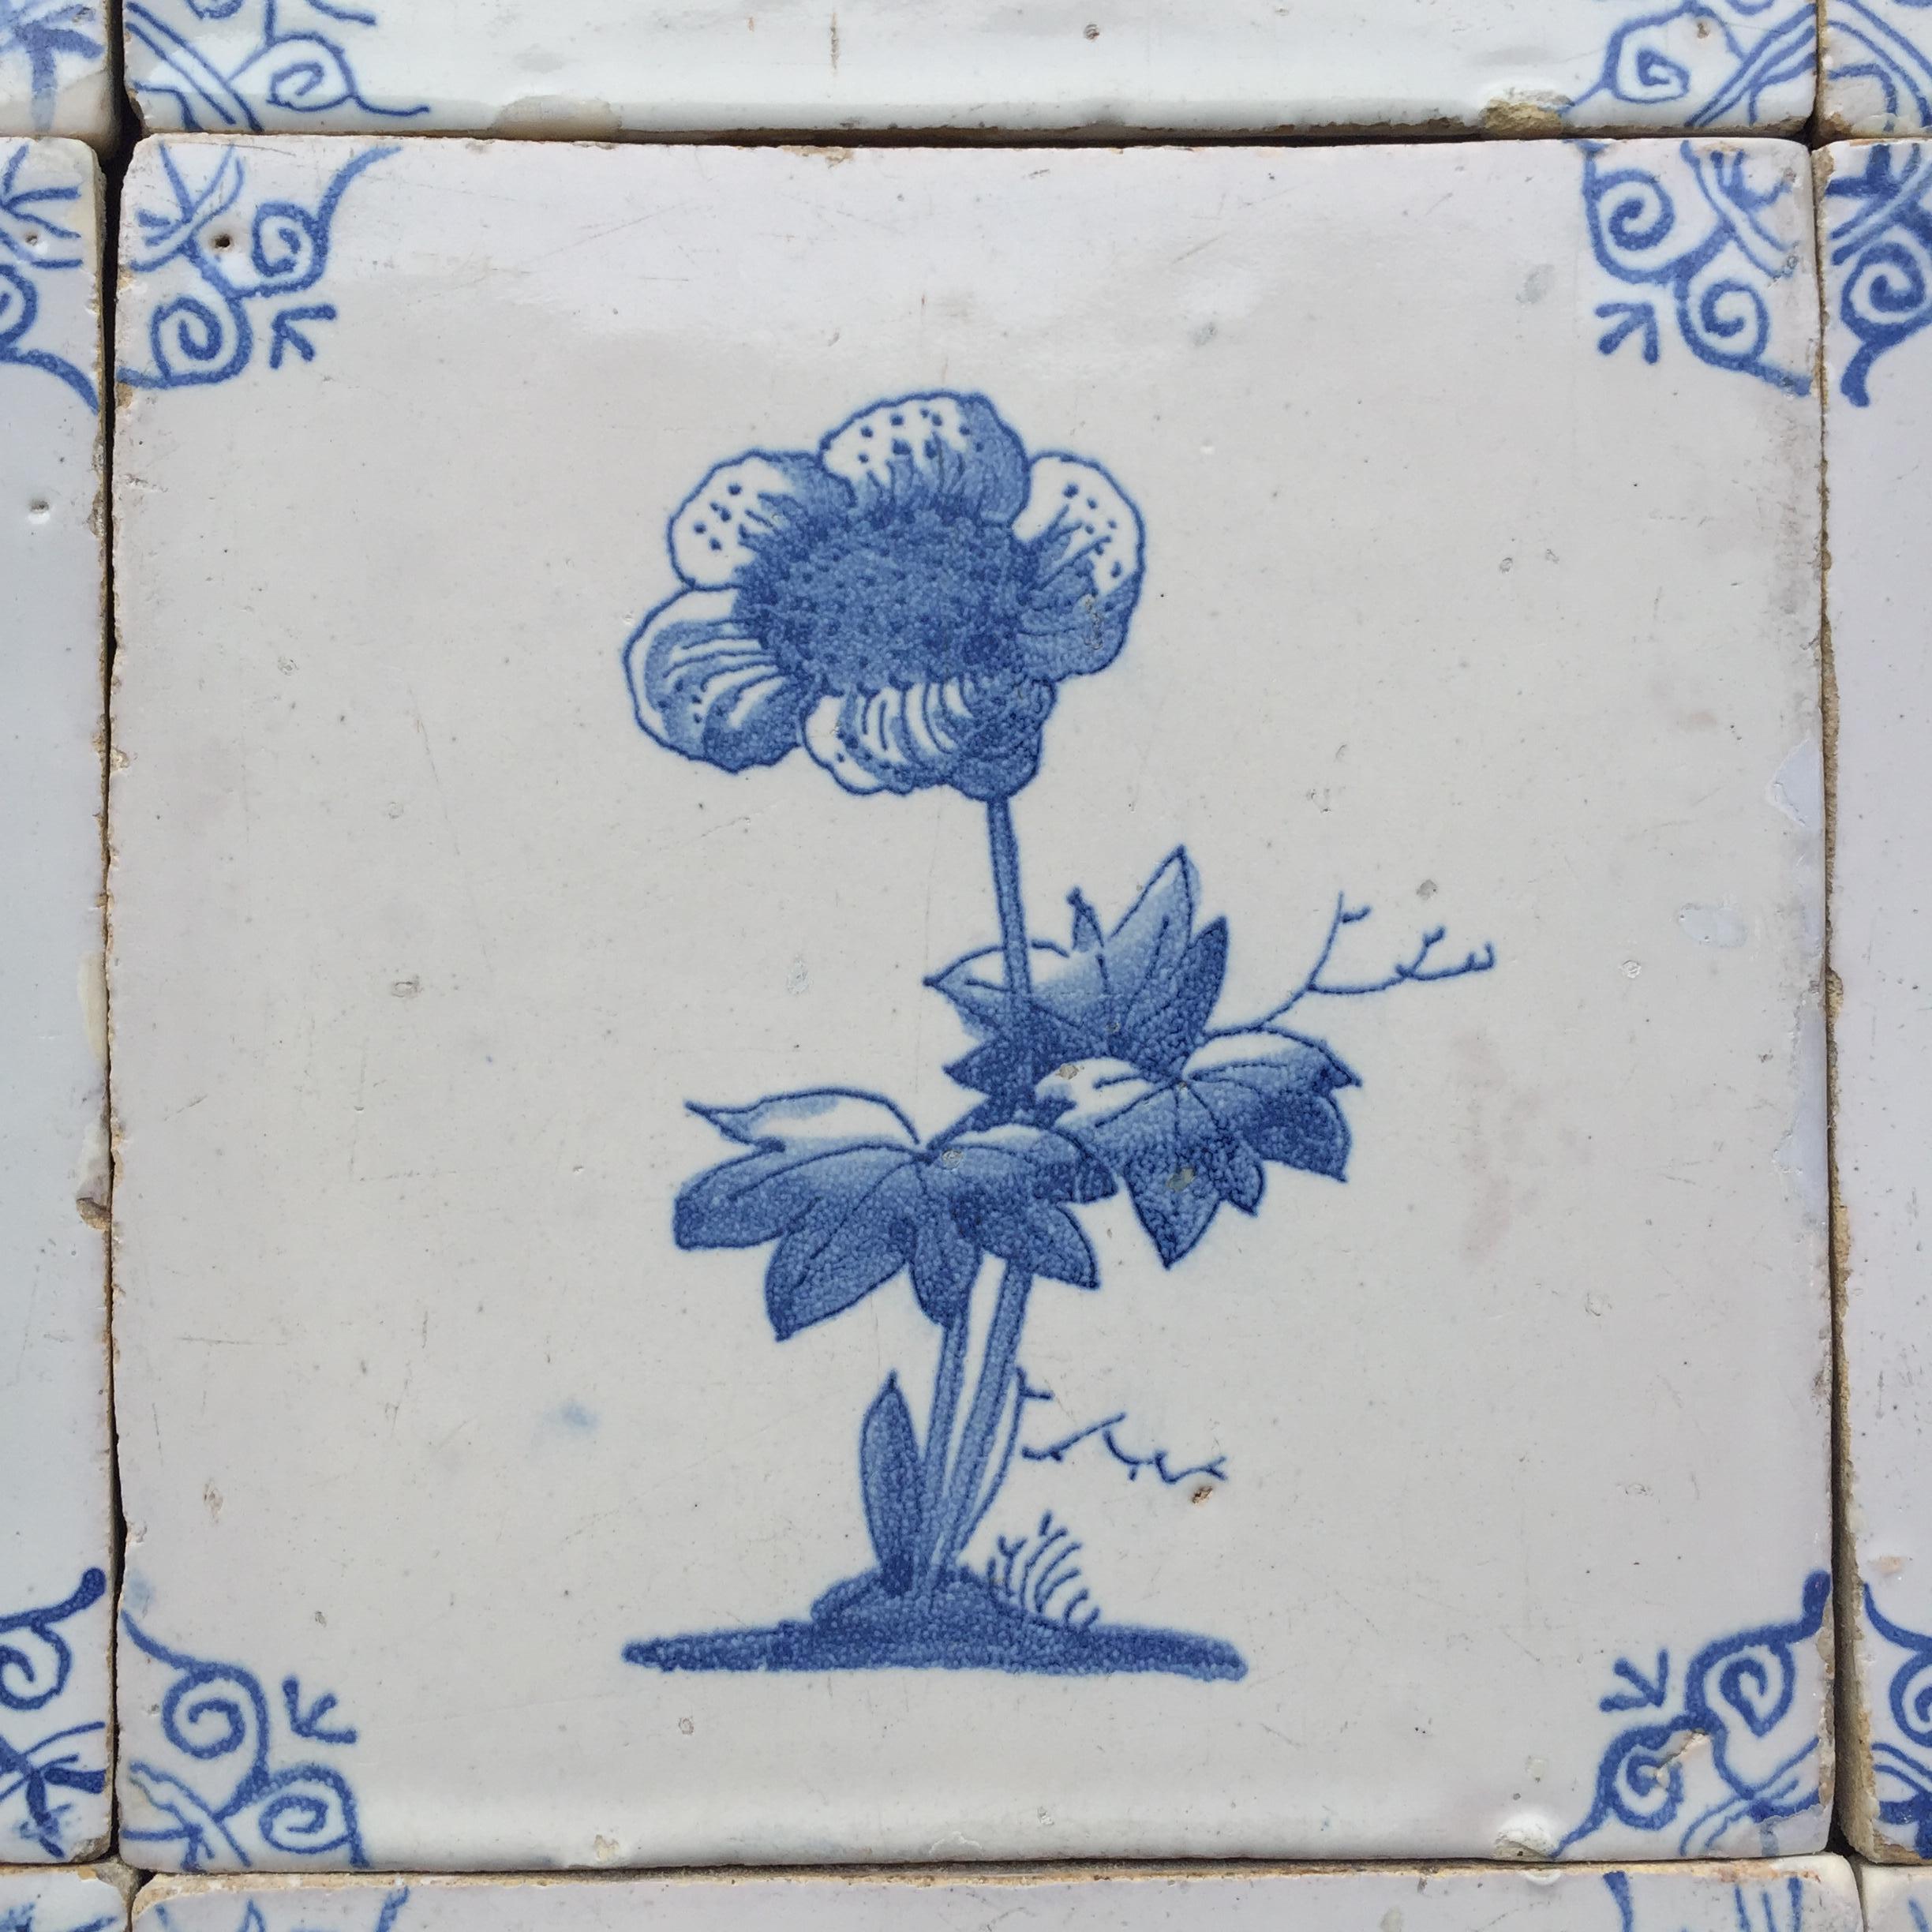 Rare Set of 12 Dutch Delft Tiles with Flowers and Insects, 17th Century 4